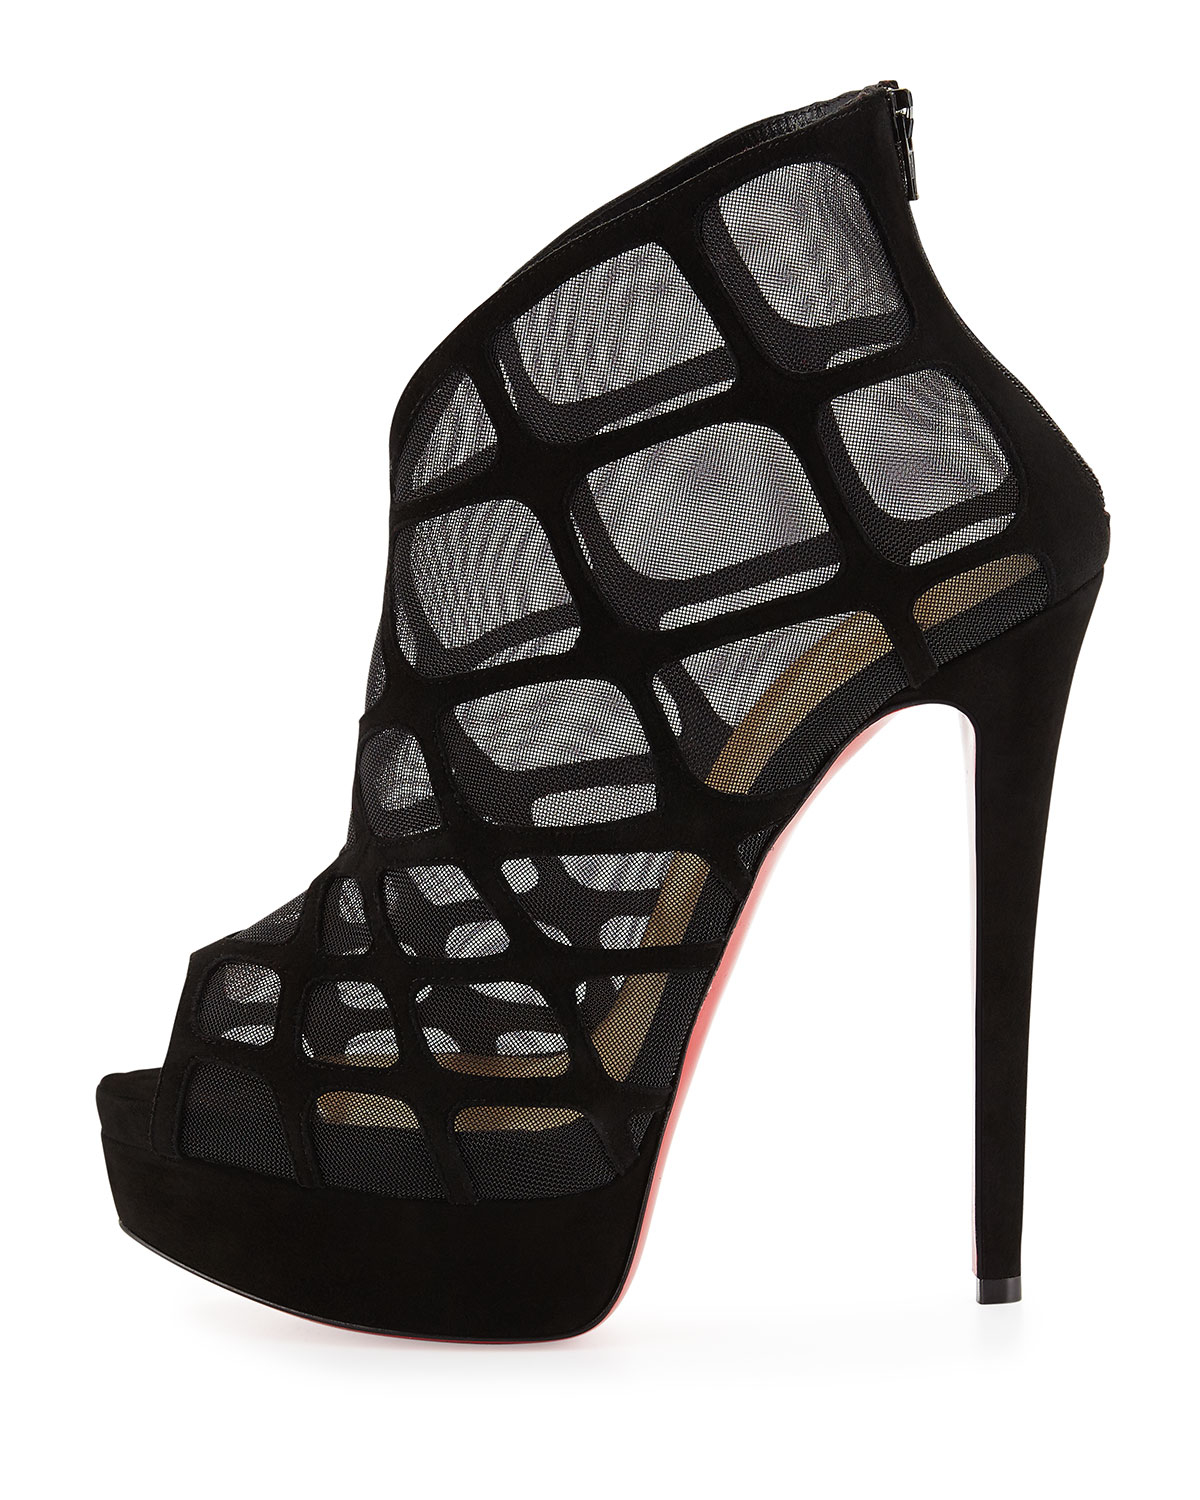 black christian louboutin mens sneakers - Christian louboutin Altarakna Mesh-caged Red Sole Bootie in Black ...